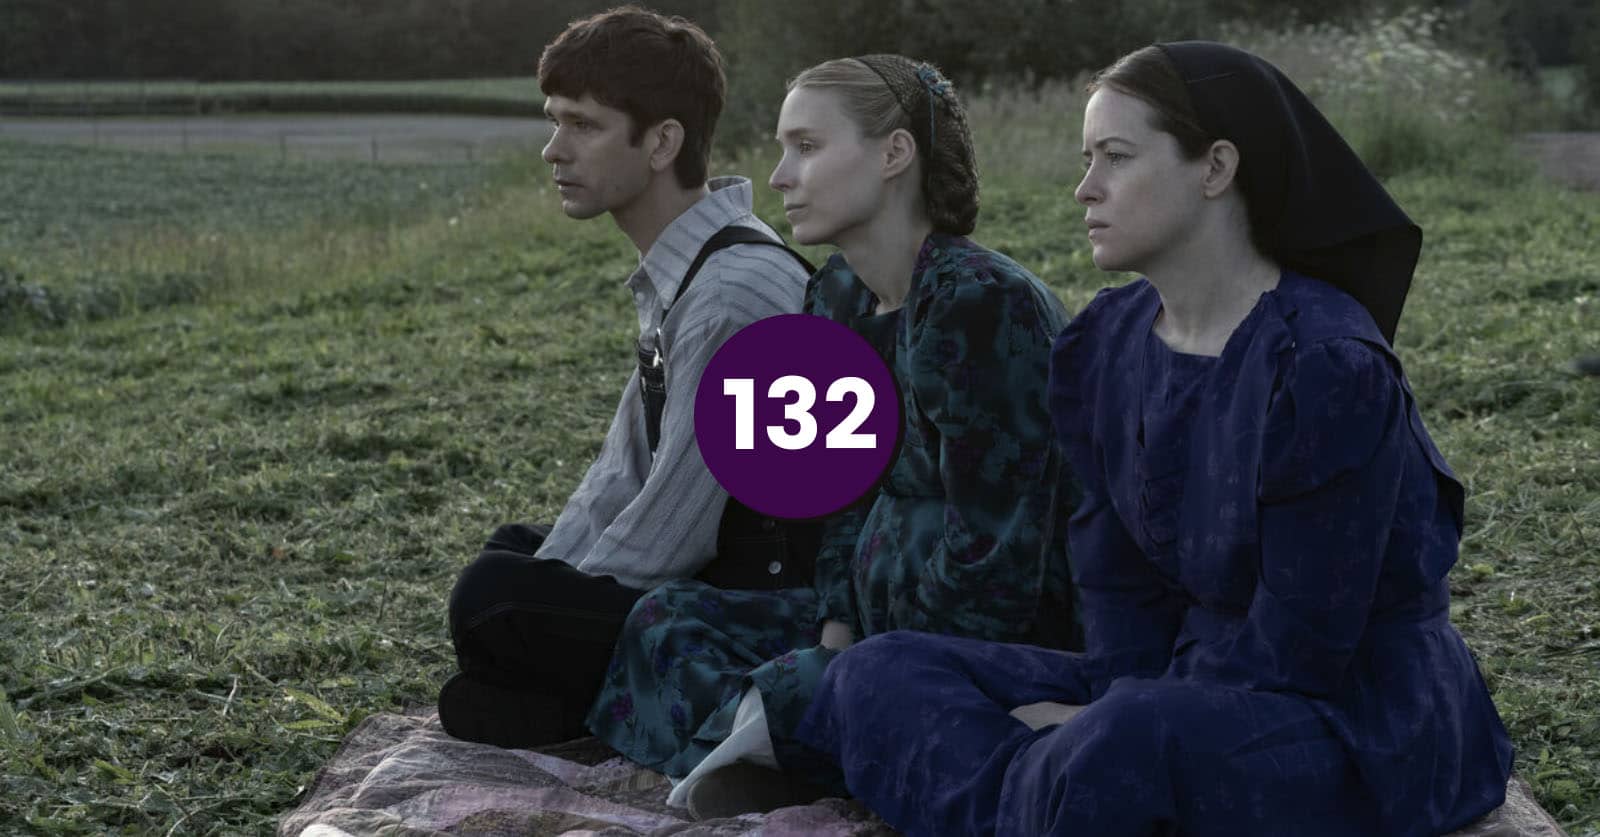 Still from Women Talking the film which we discuss on the podcast. From left to right: Ben Whishaw, Rooney Mara, and Claire Foy star in Sarah Polley's film Women Talking. They are all dressed as mennonites.